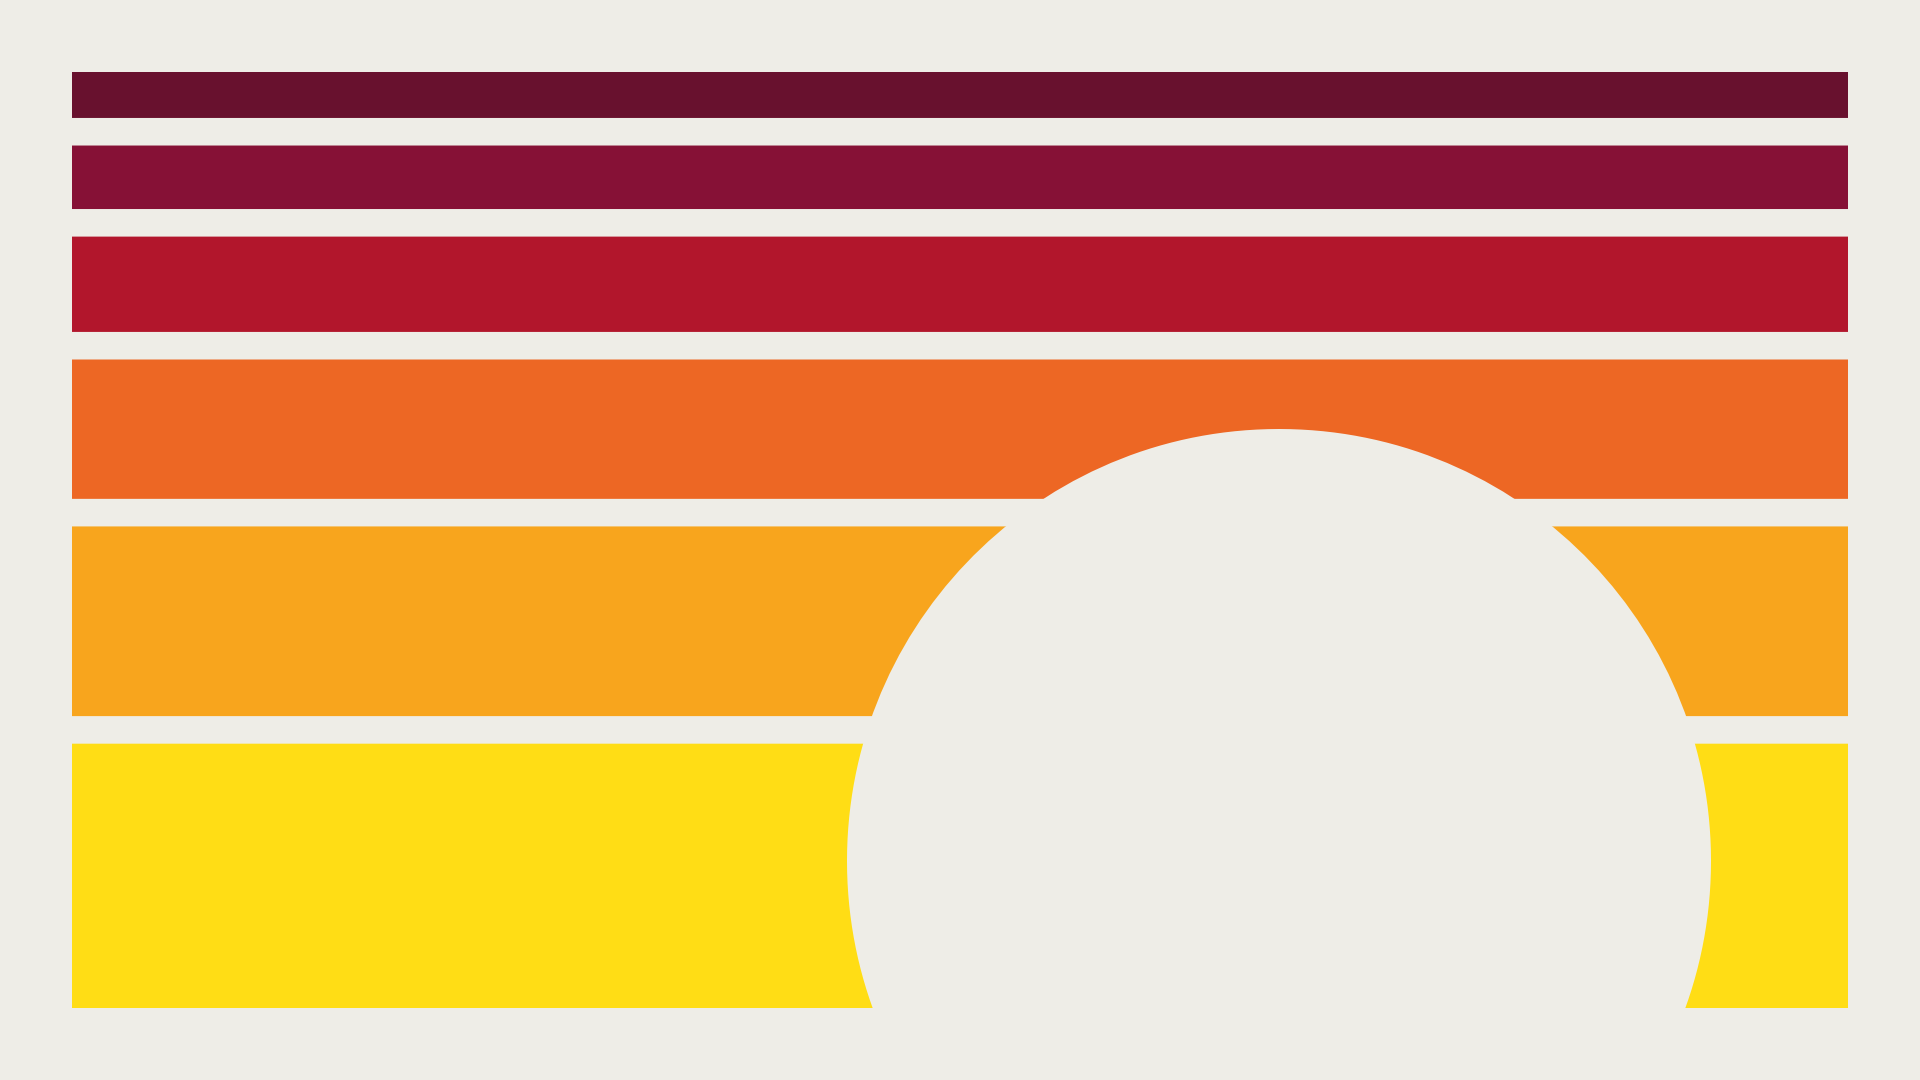  horizontal sunset-colored lines with a circular silhouette